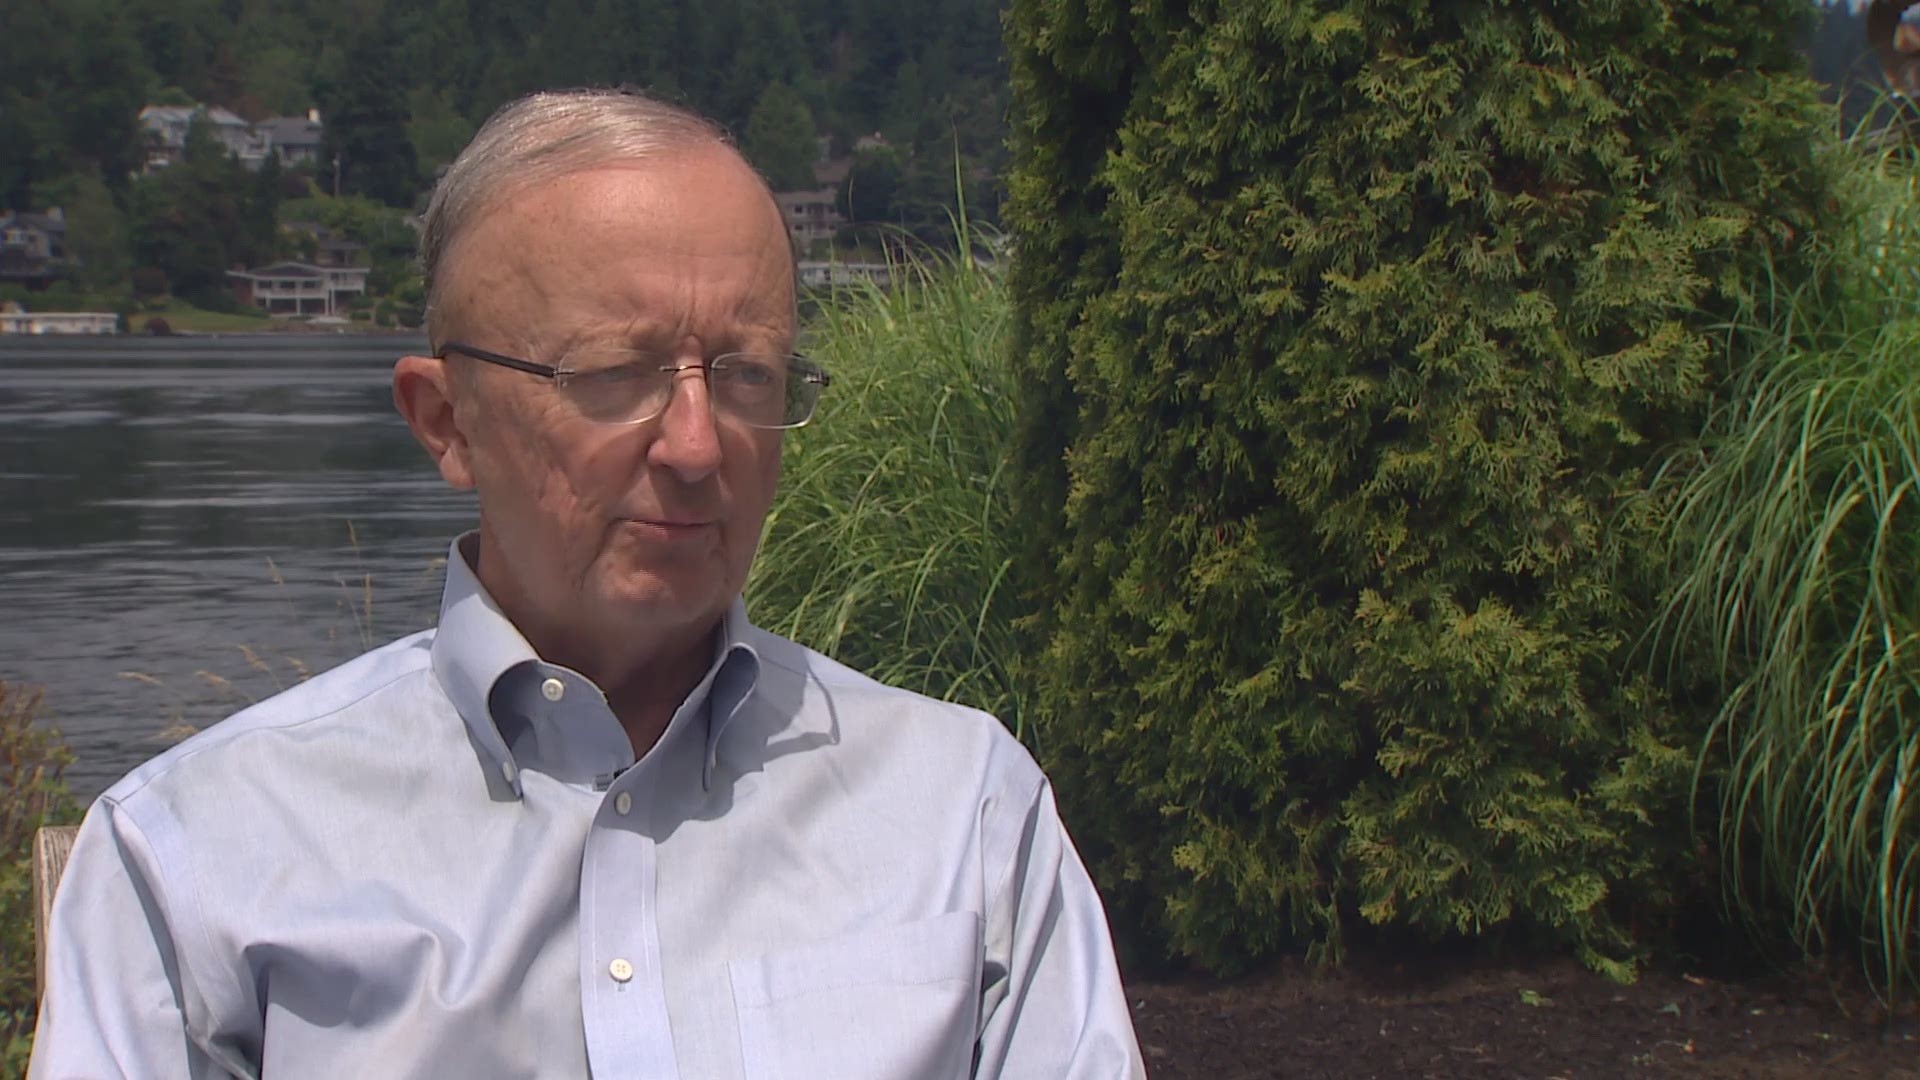 710 ESPN's John Clayton talks to KING 5's Paul Silvi on the possibly the most stacked position in camp, the running backs.   Clayton gives his take on who will start, why Pete Carroll loves C.J. Prosise, and who could make a real case to be on the 53-man roster.